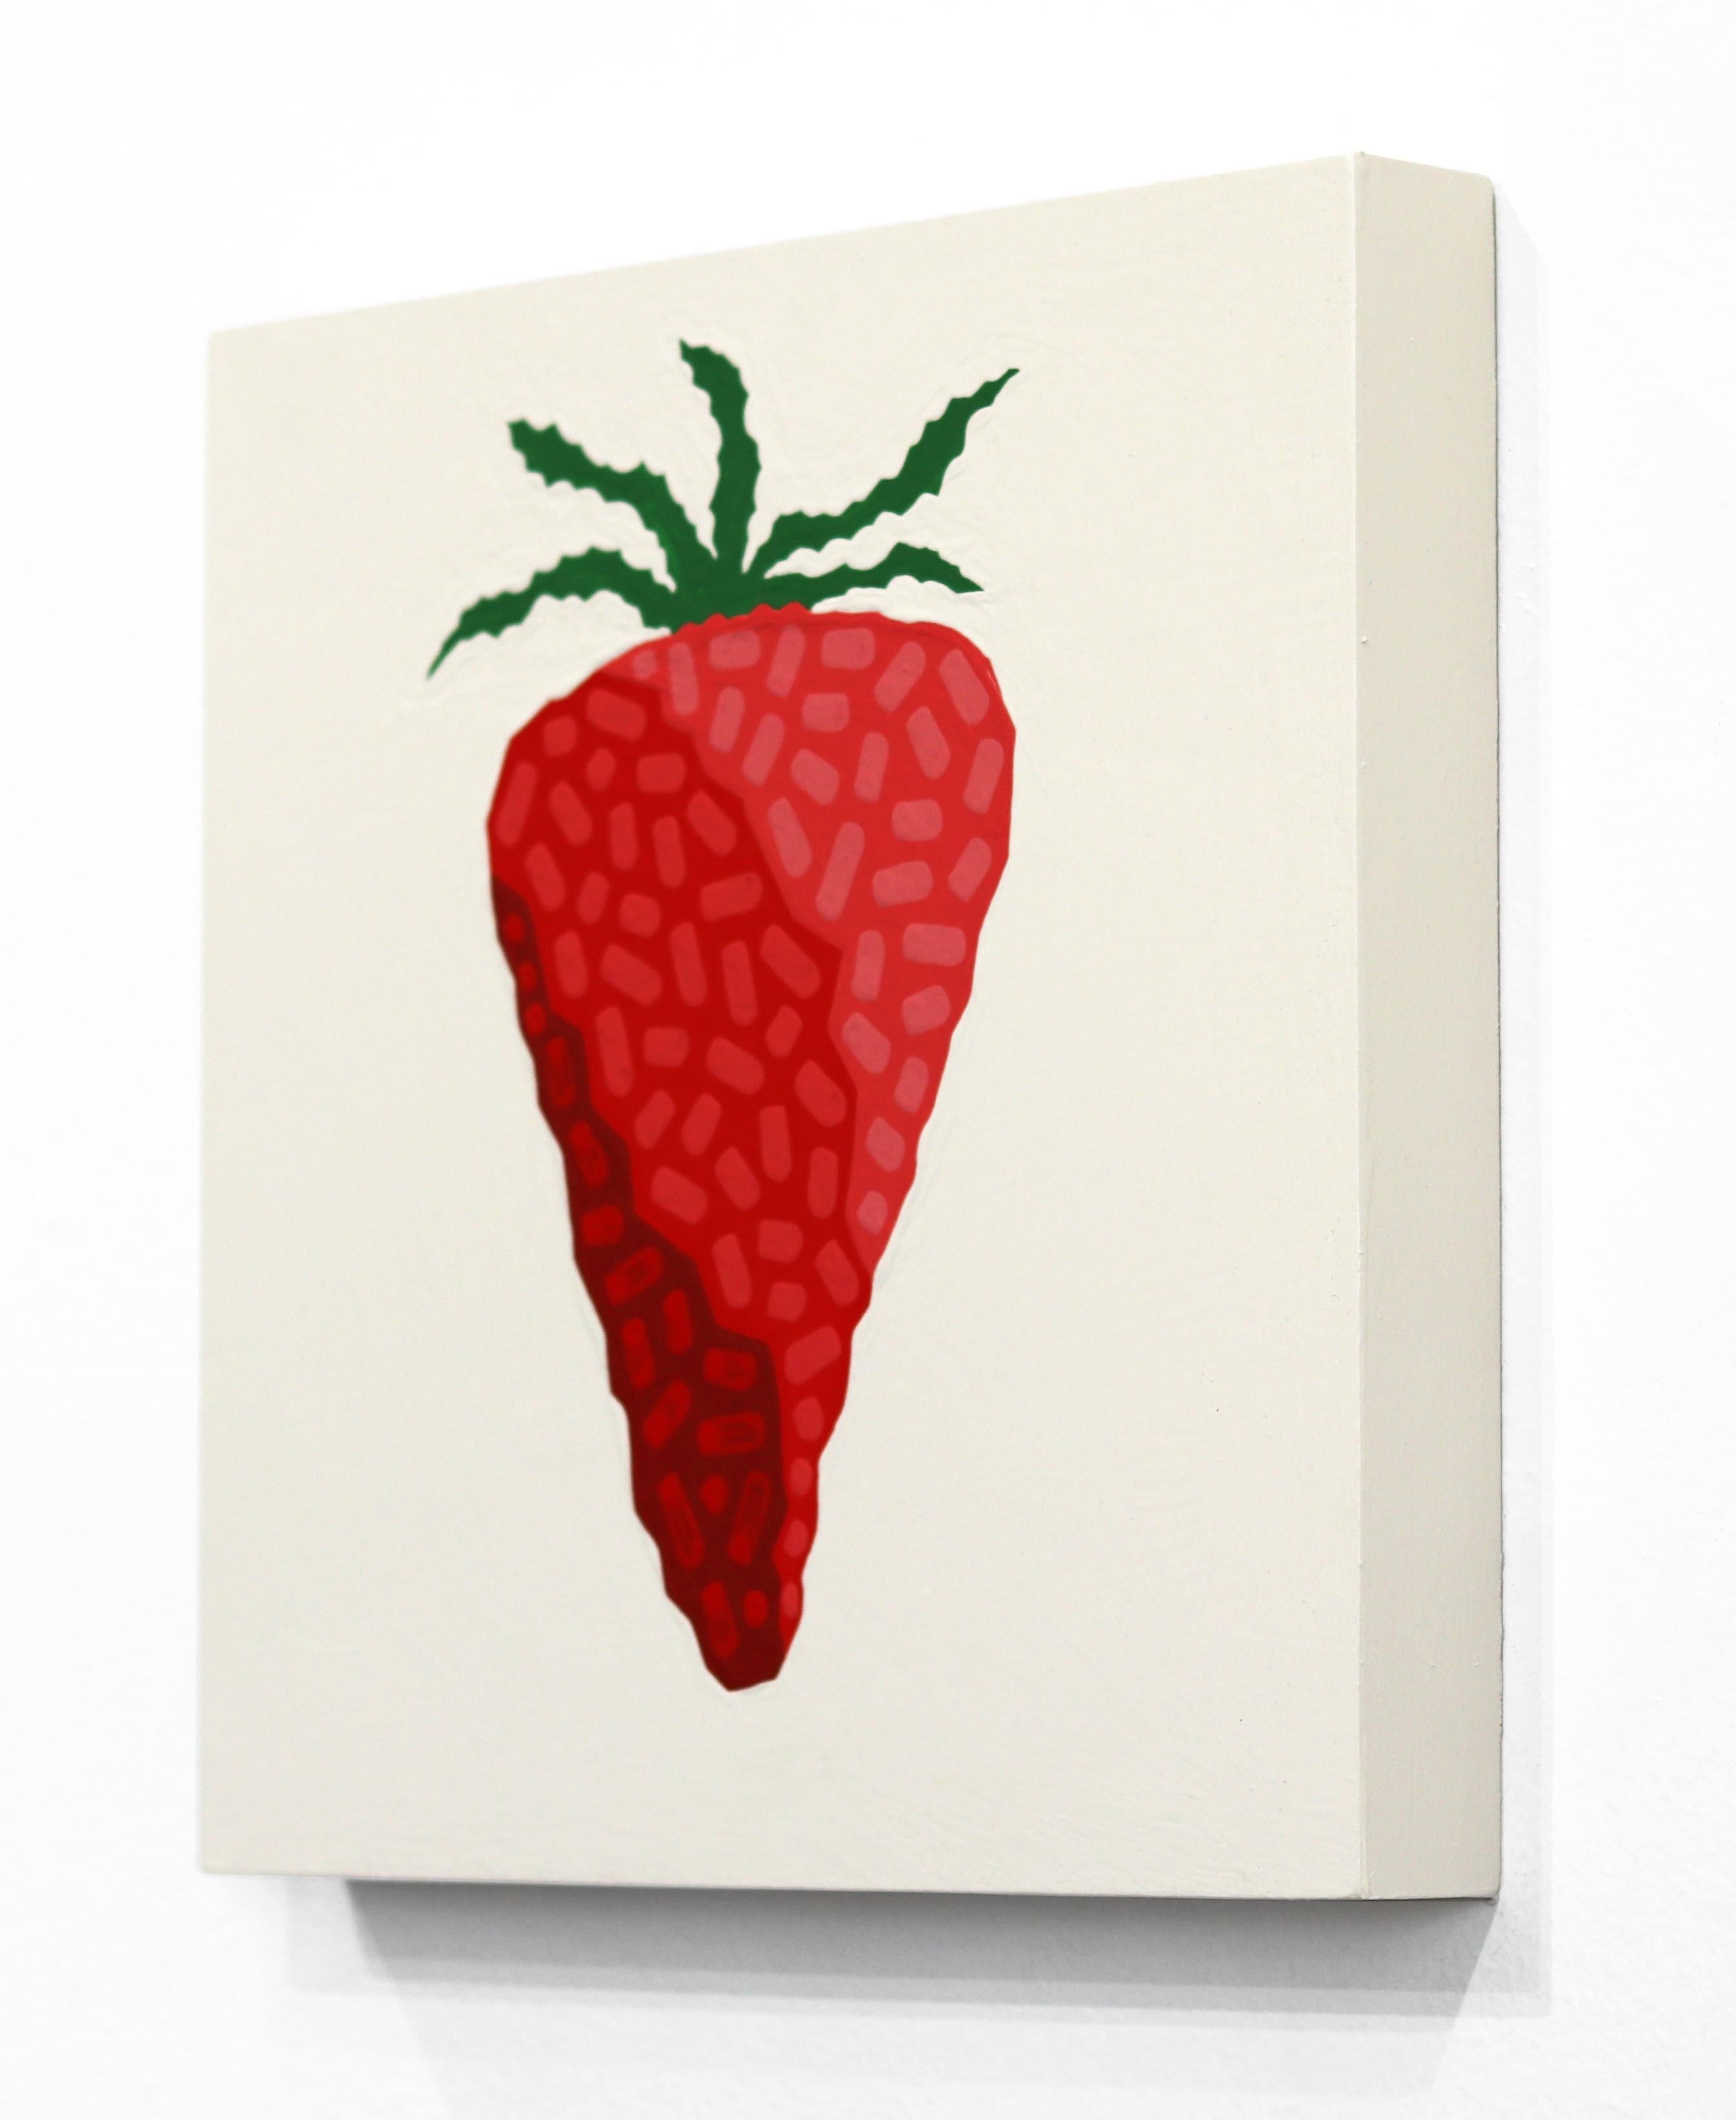 Strawberry and Cream - Vibrant Southwest Inspired Pop Art Painting For Sale 2